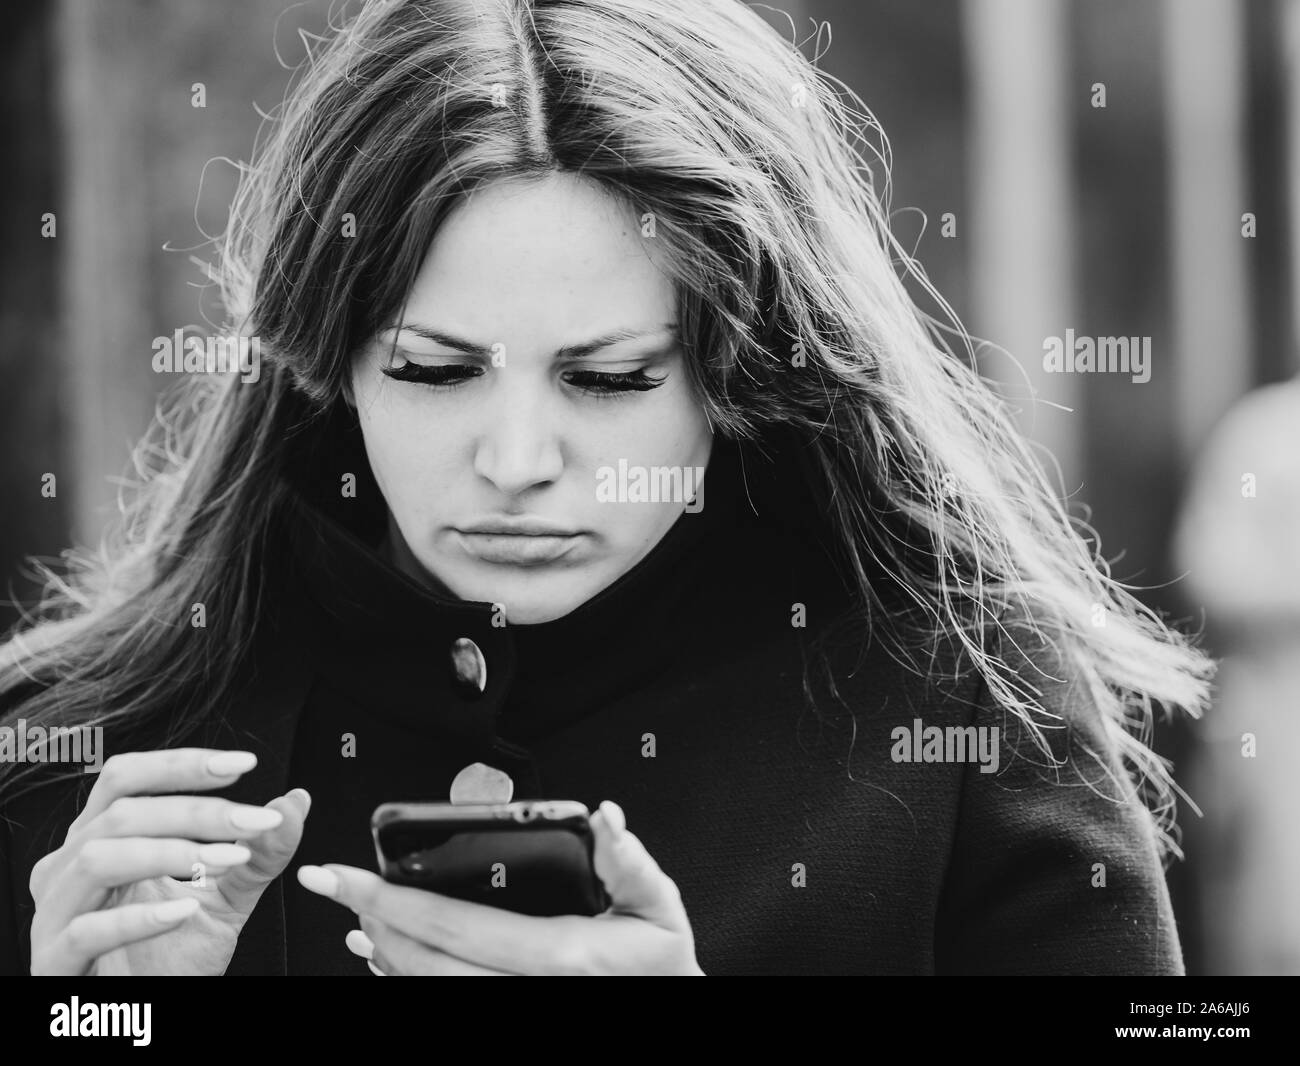 Moscow, Russia - October 19, 2019: A young woman is carefully looking at the smartphone screen that is in her hands. False eyelashes on the eyes. Blac Stock Photo